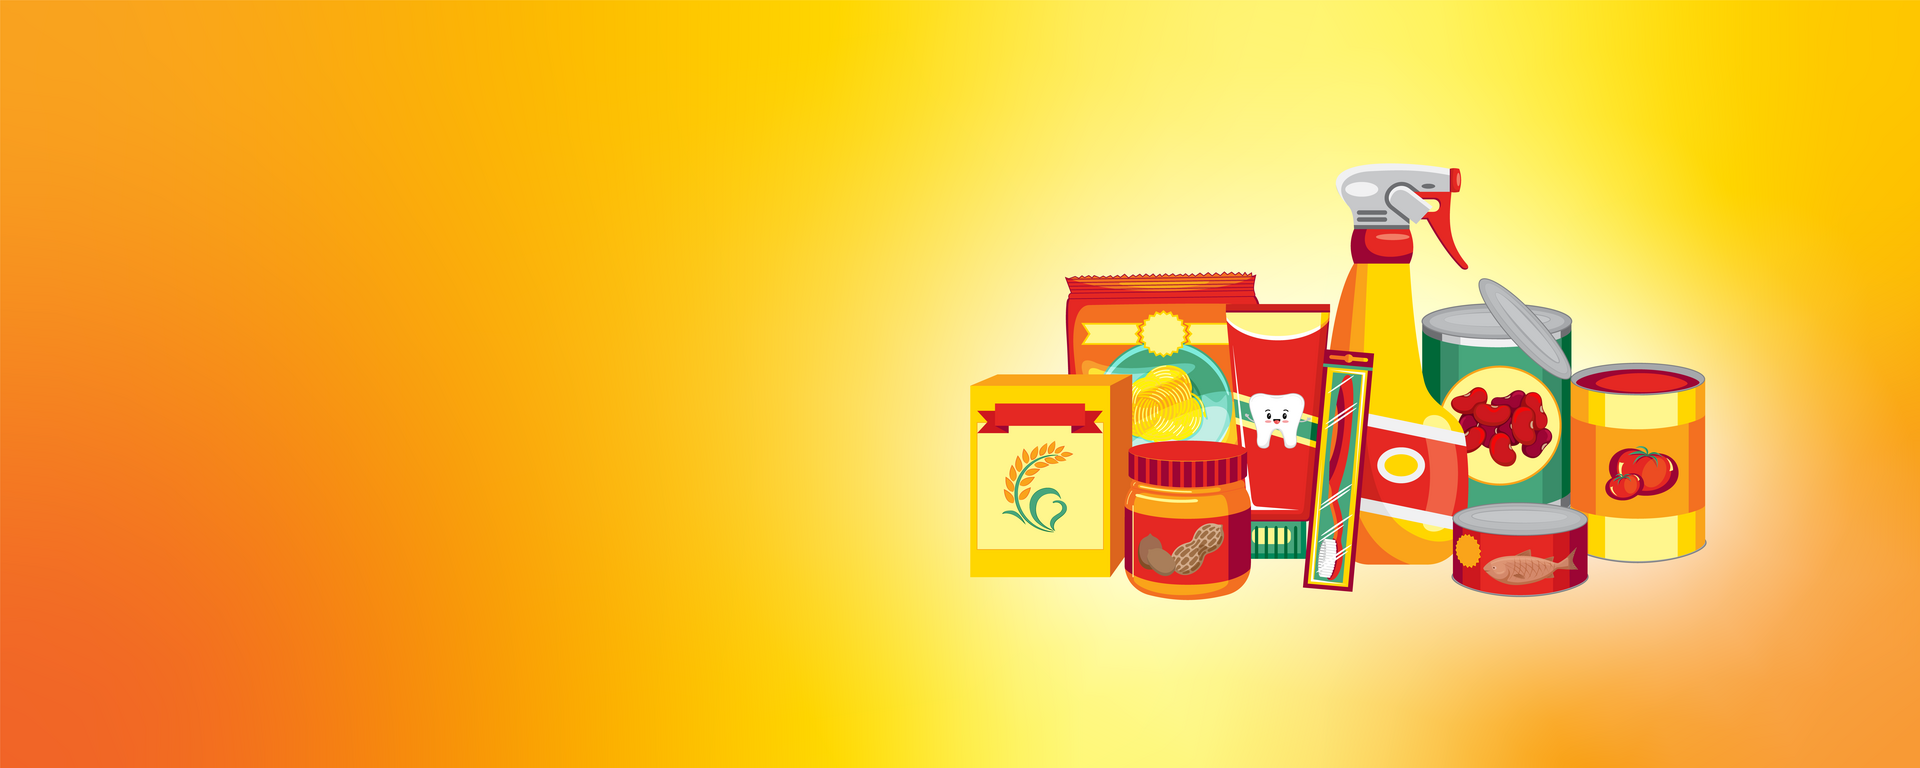 Community Pantry-Illustration of packaged food, cleaning and hygiene items with a yellow background